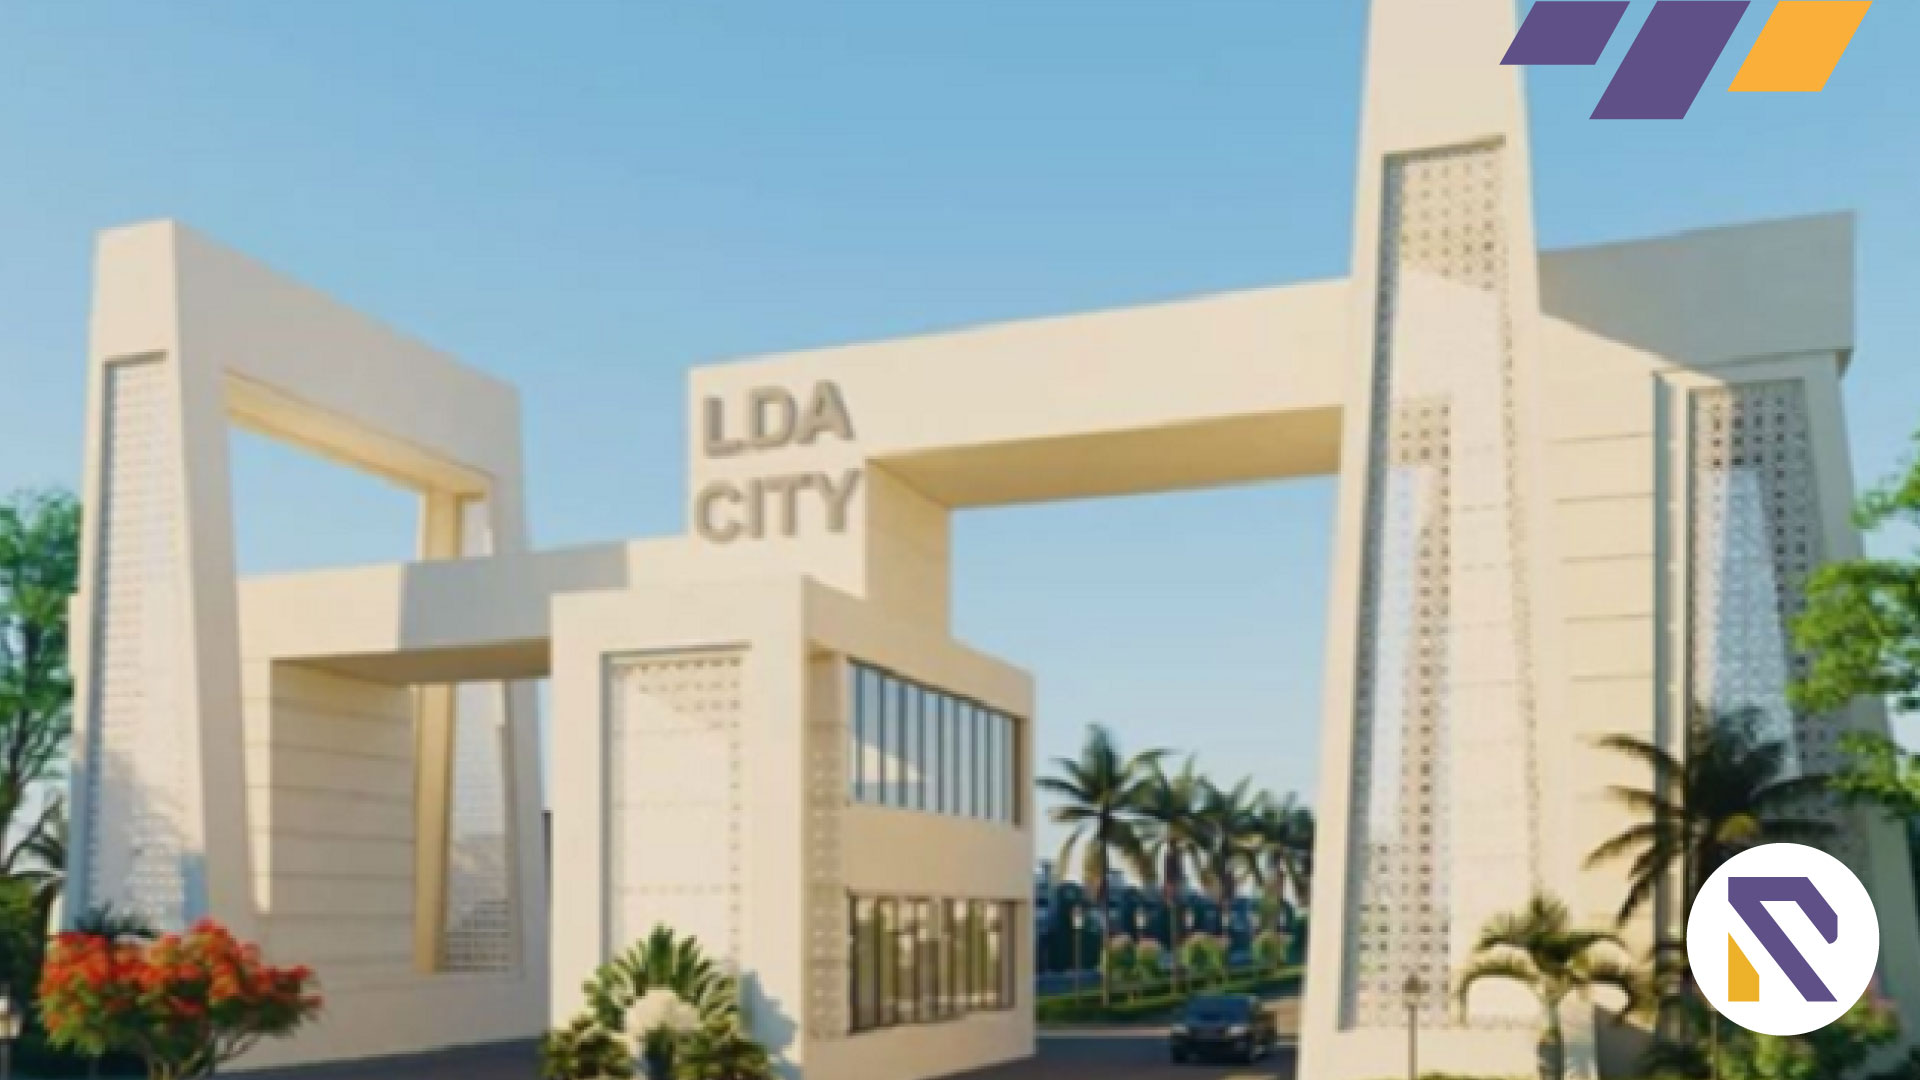 Lahore Development Authority (LDA) has joined hands with the Punjab Central Business District Development Authority (CBD) to launch innovative projects within the jurisdiction of Lahore